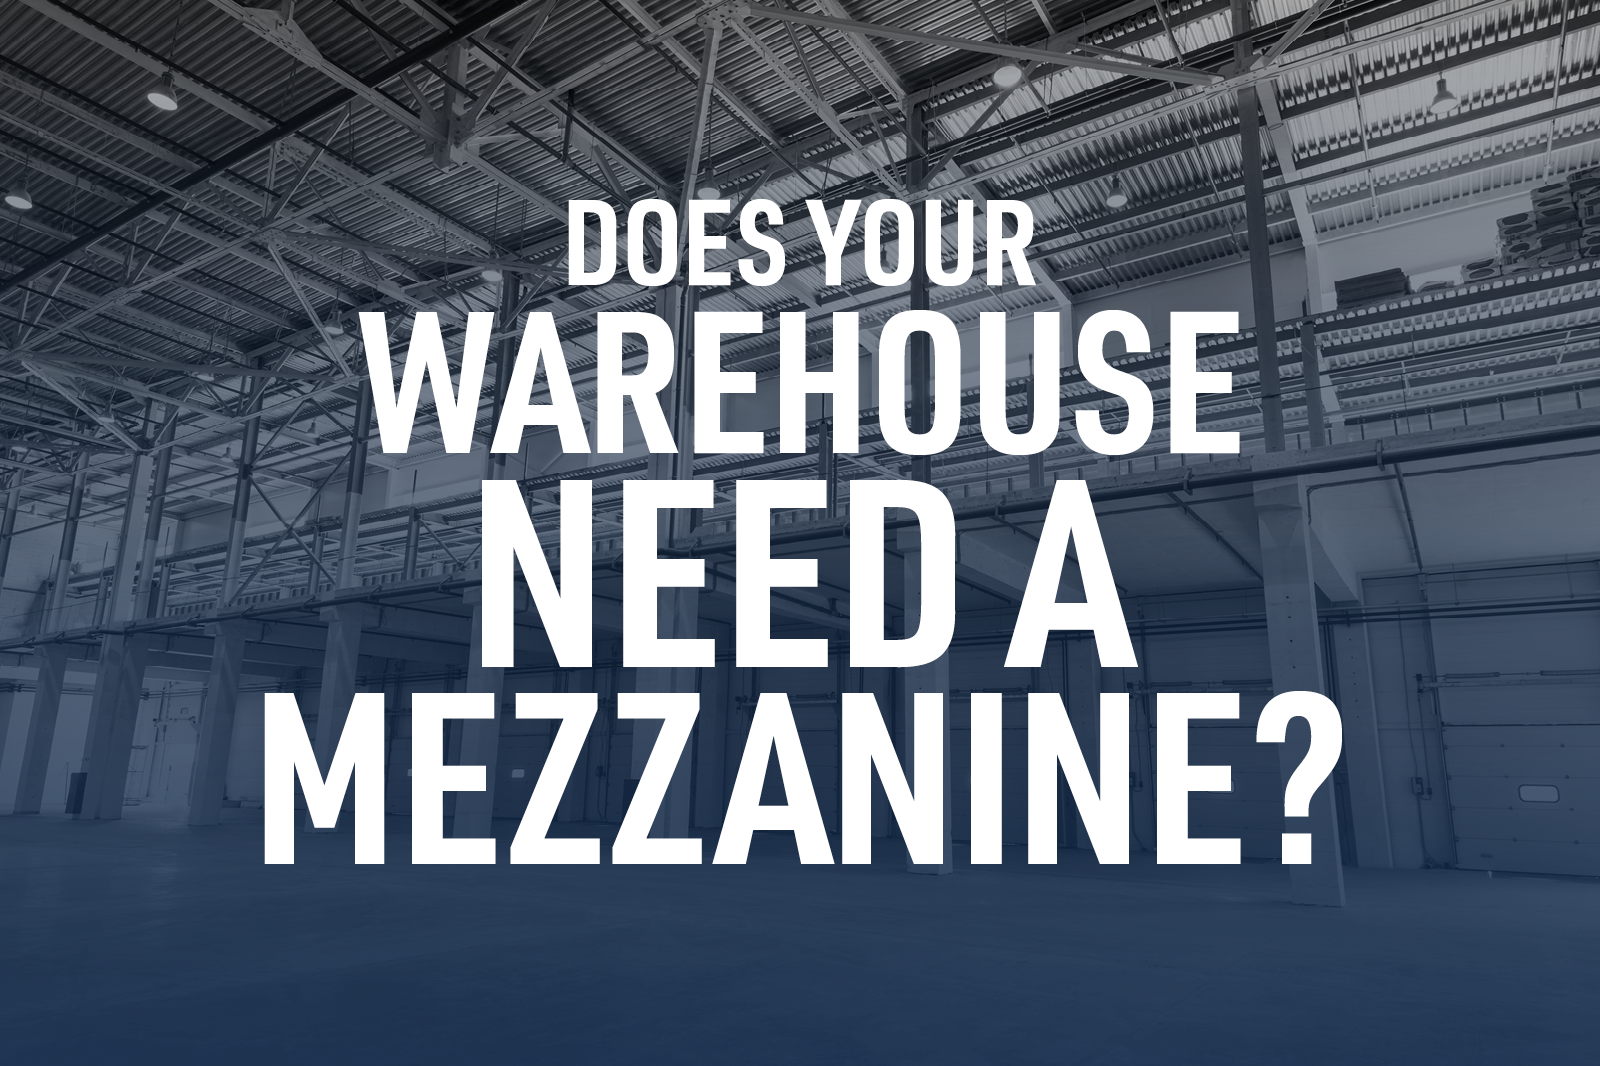 DOES YOUR WAREHOUSE NEED A MEZZANINE?